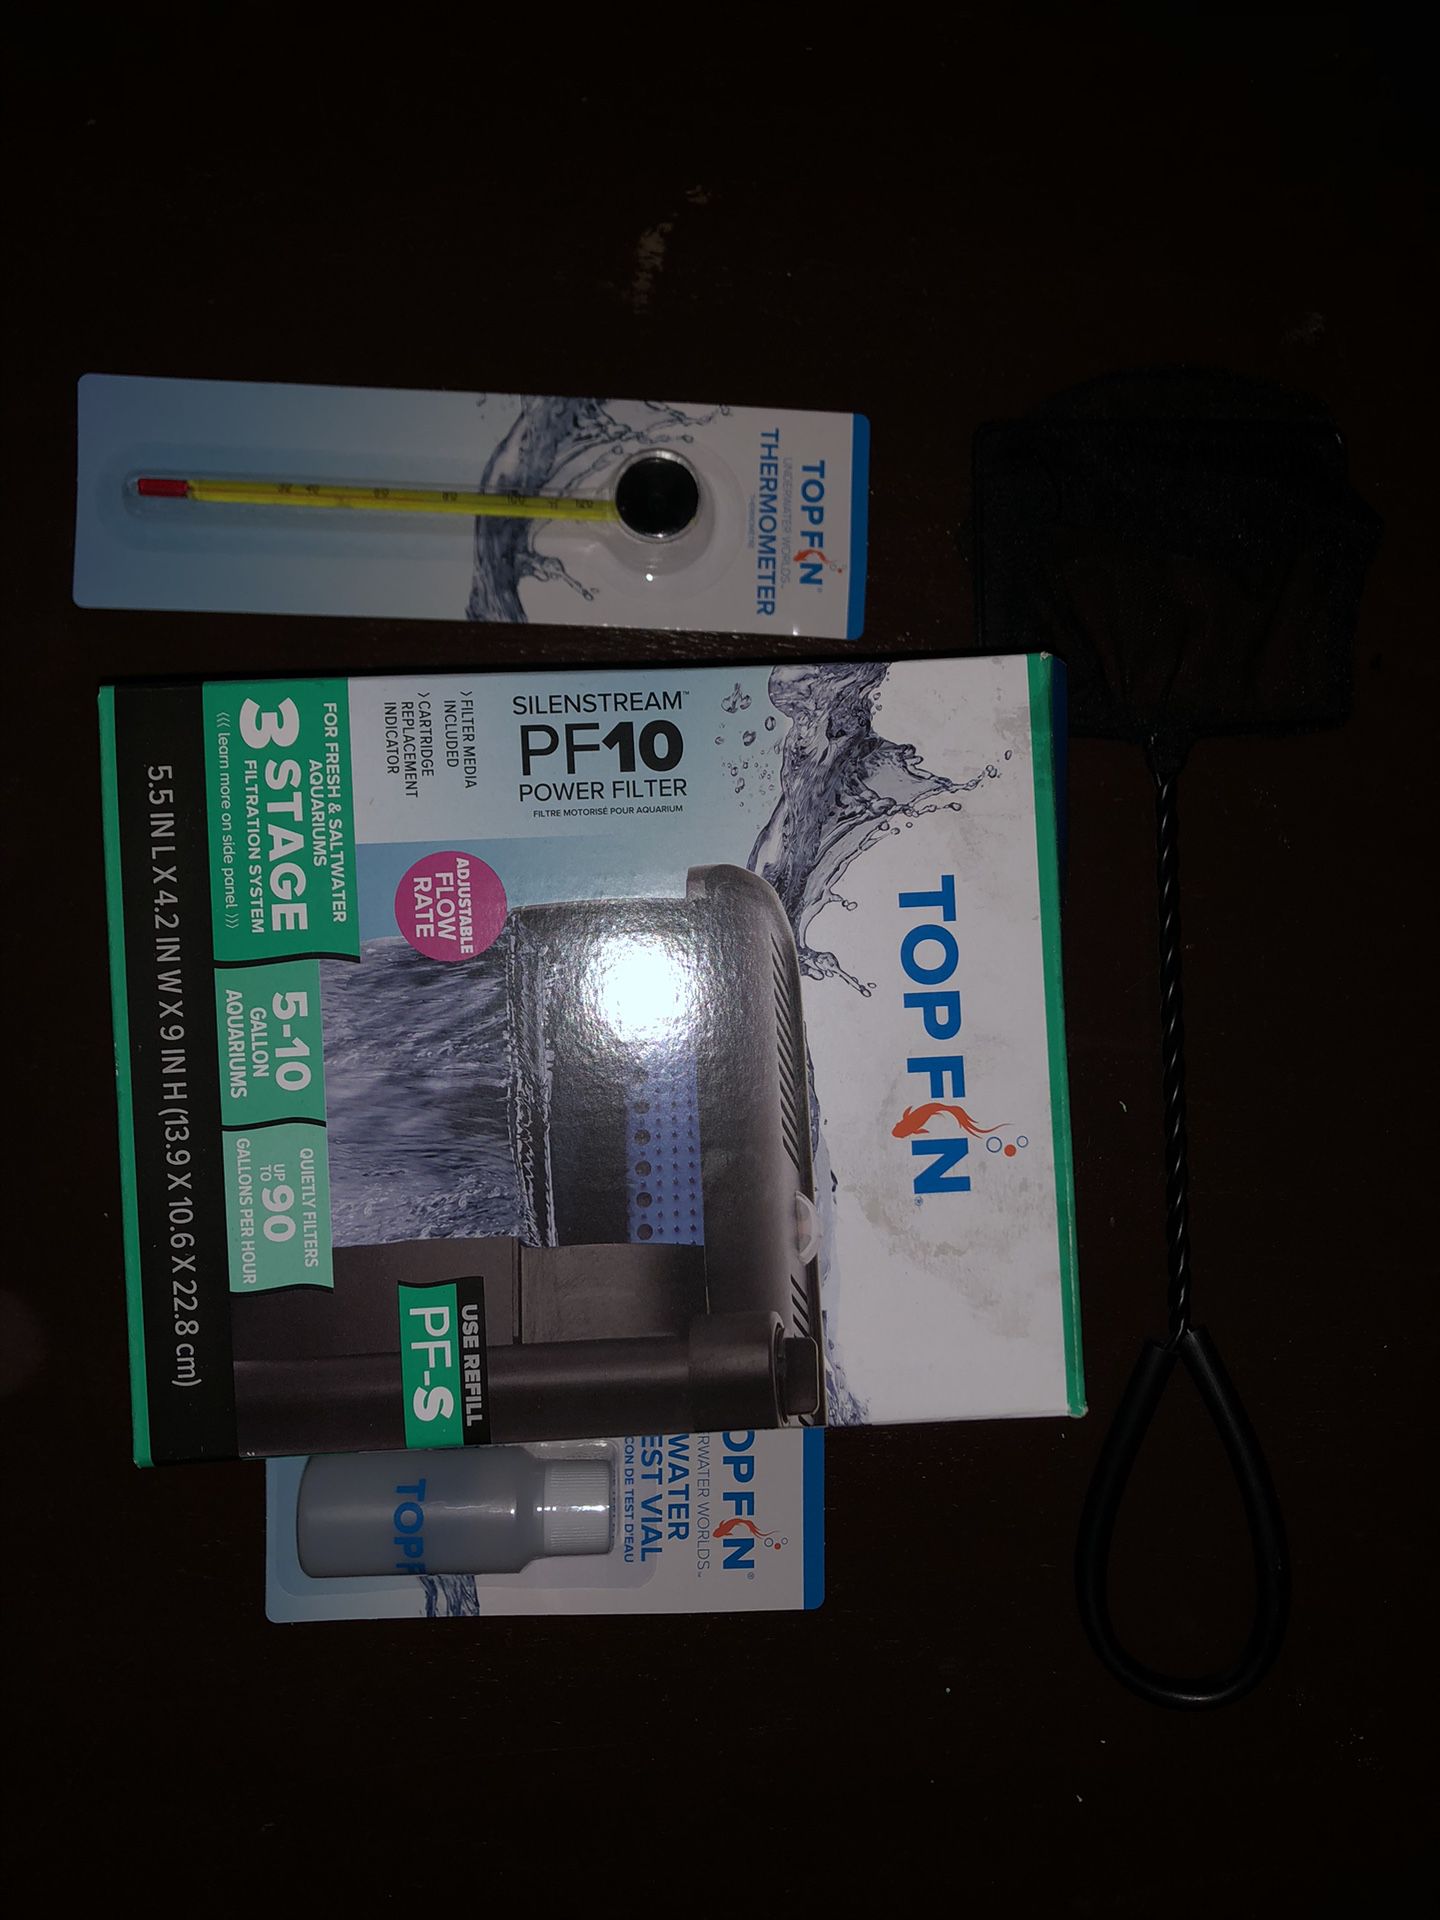 Top Fin Water Filter, Net, Thermometer, And Water Test Vial